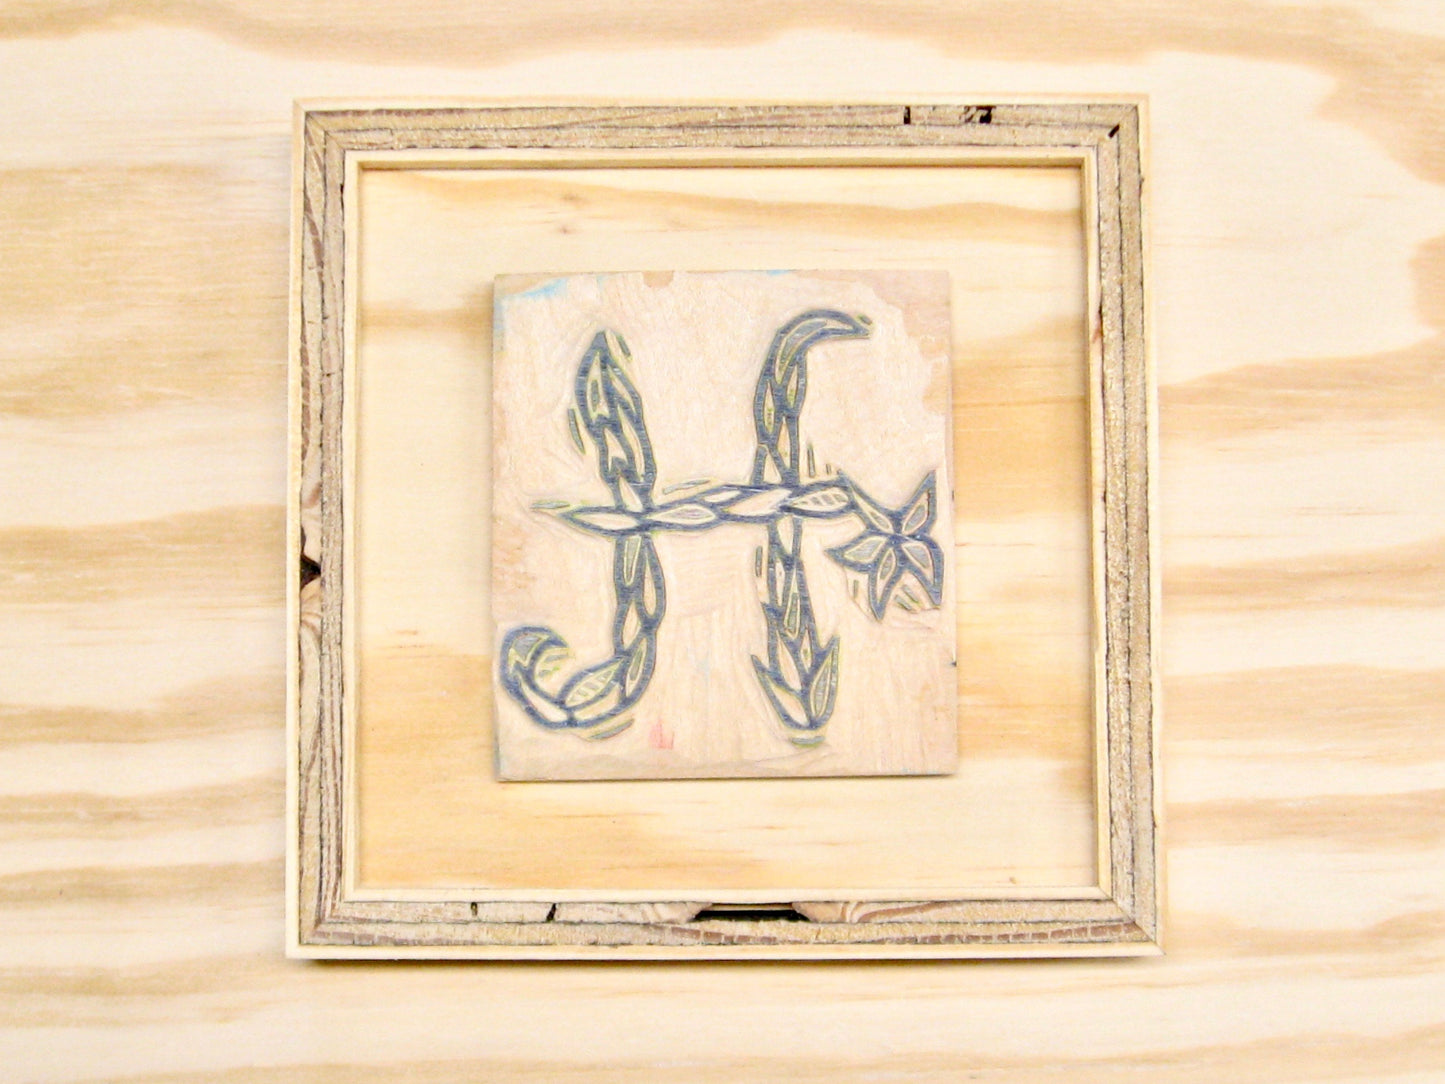 Letter H - hand carved original printers block with 6-pack monogram greeting cards - collector's item